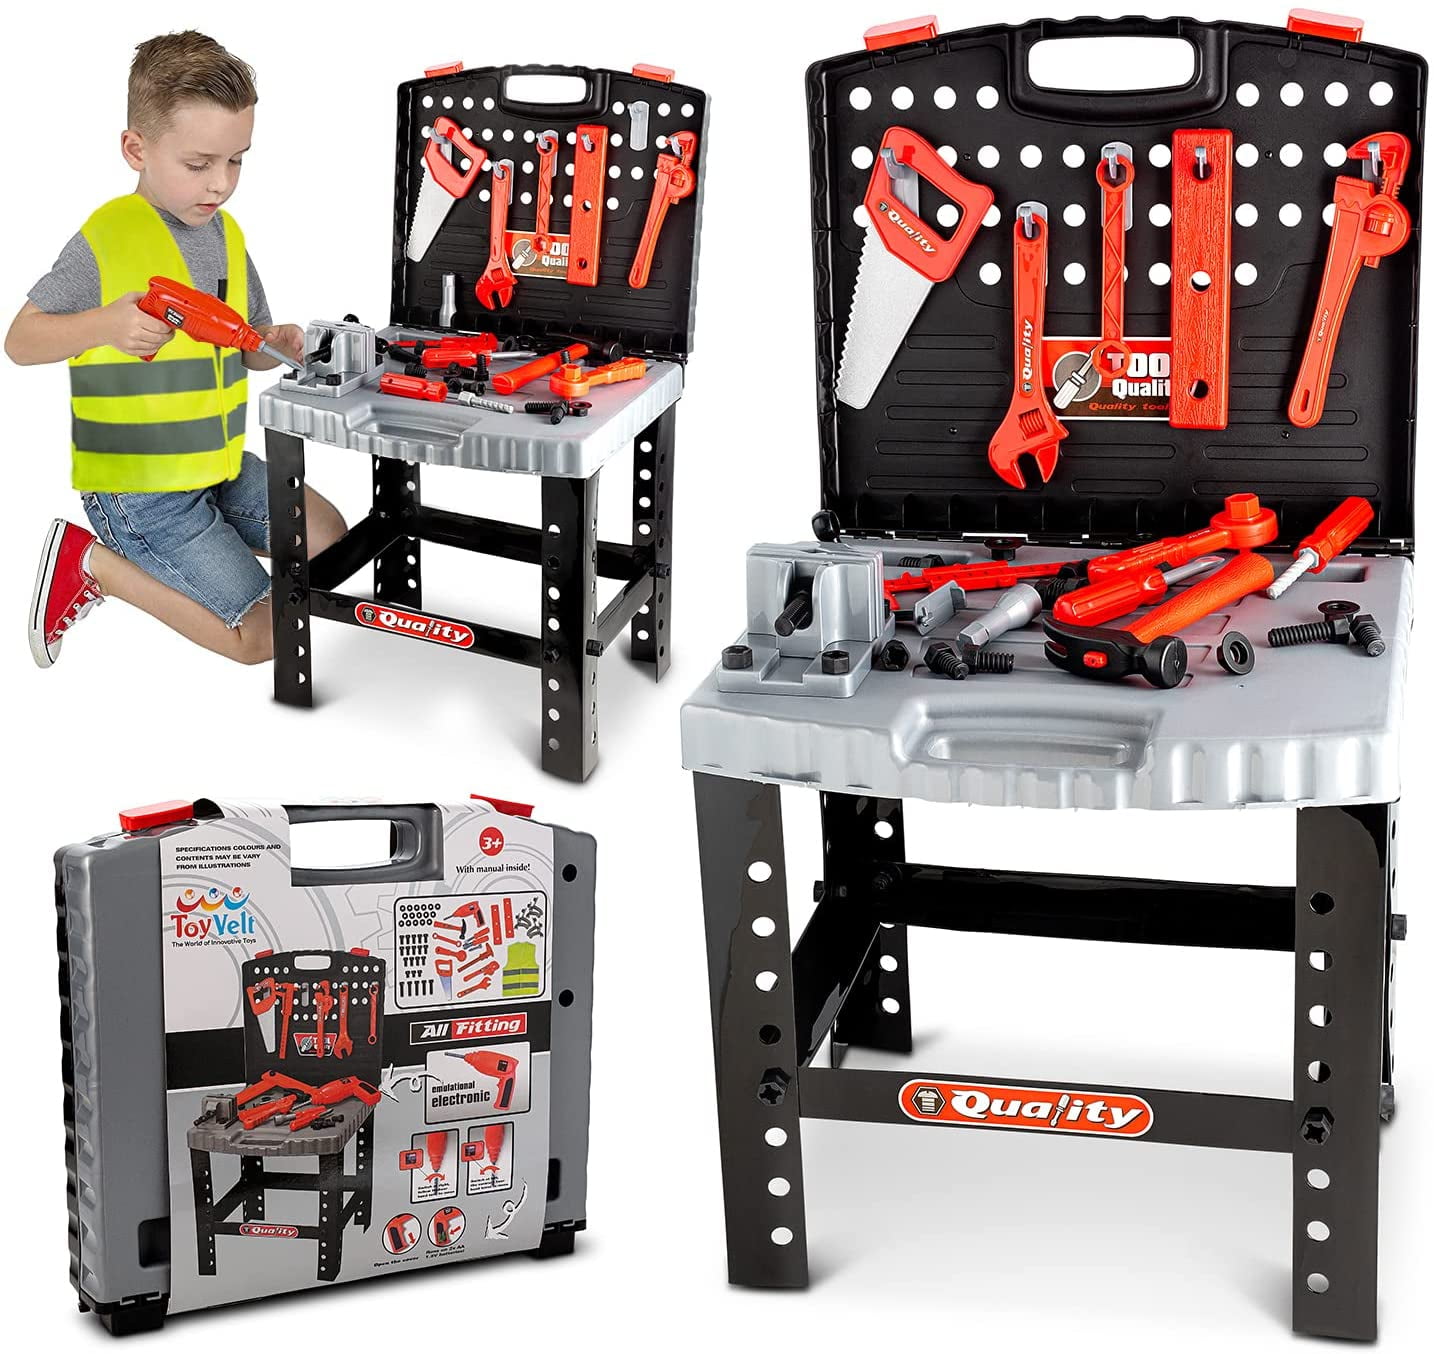 TOY CHOI'S Pretend Play Workbench Toy Tool Set 82 Pieces Construction Kit  Outdoor Travel Preschool Gift for Kids Boys Girls